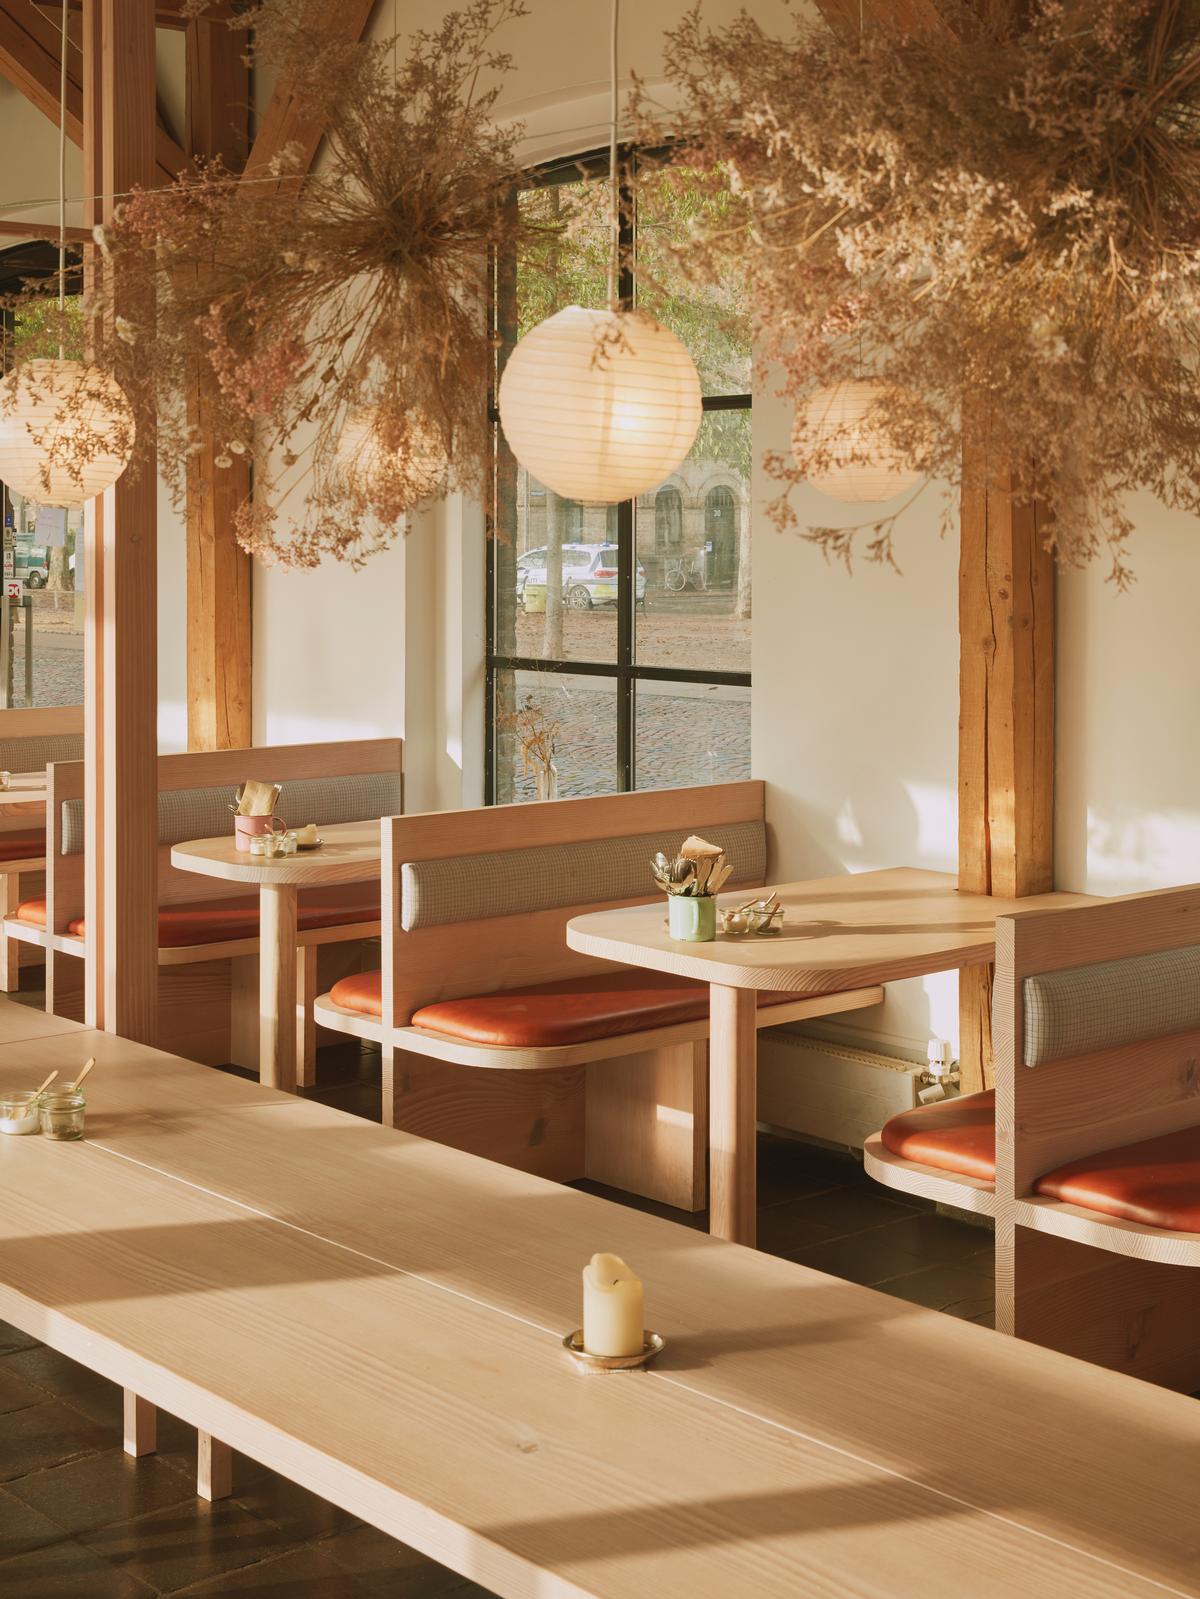 The interior was inspired by the trends for casual, relaxed dining and sharing of food / Vermland